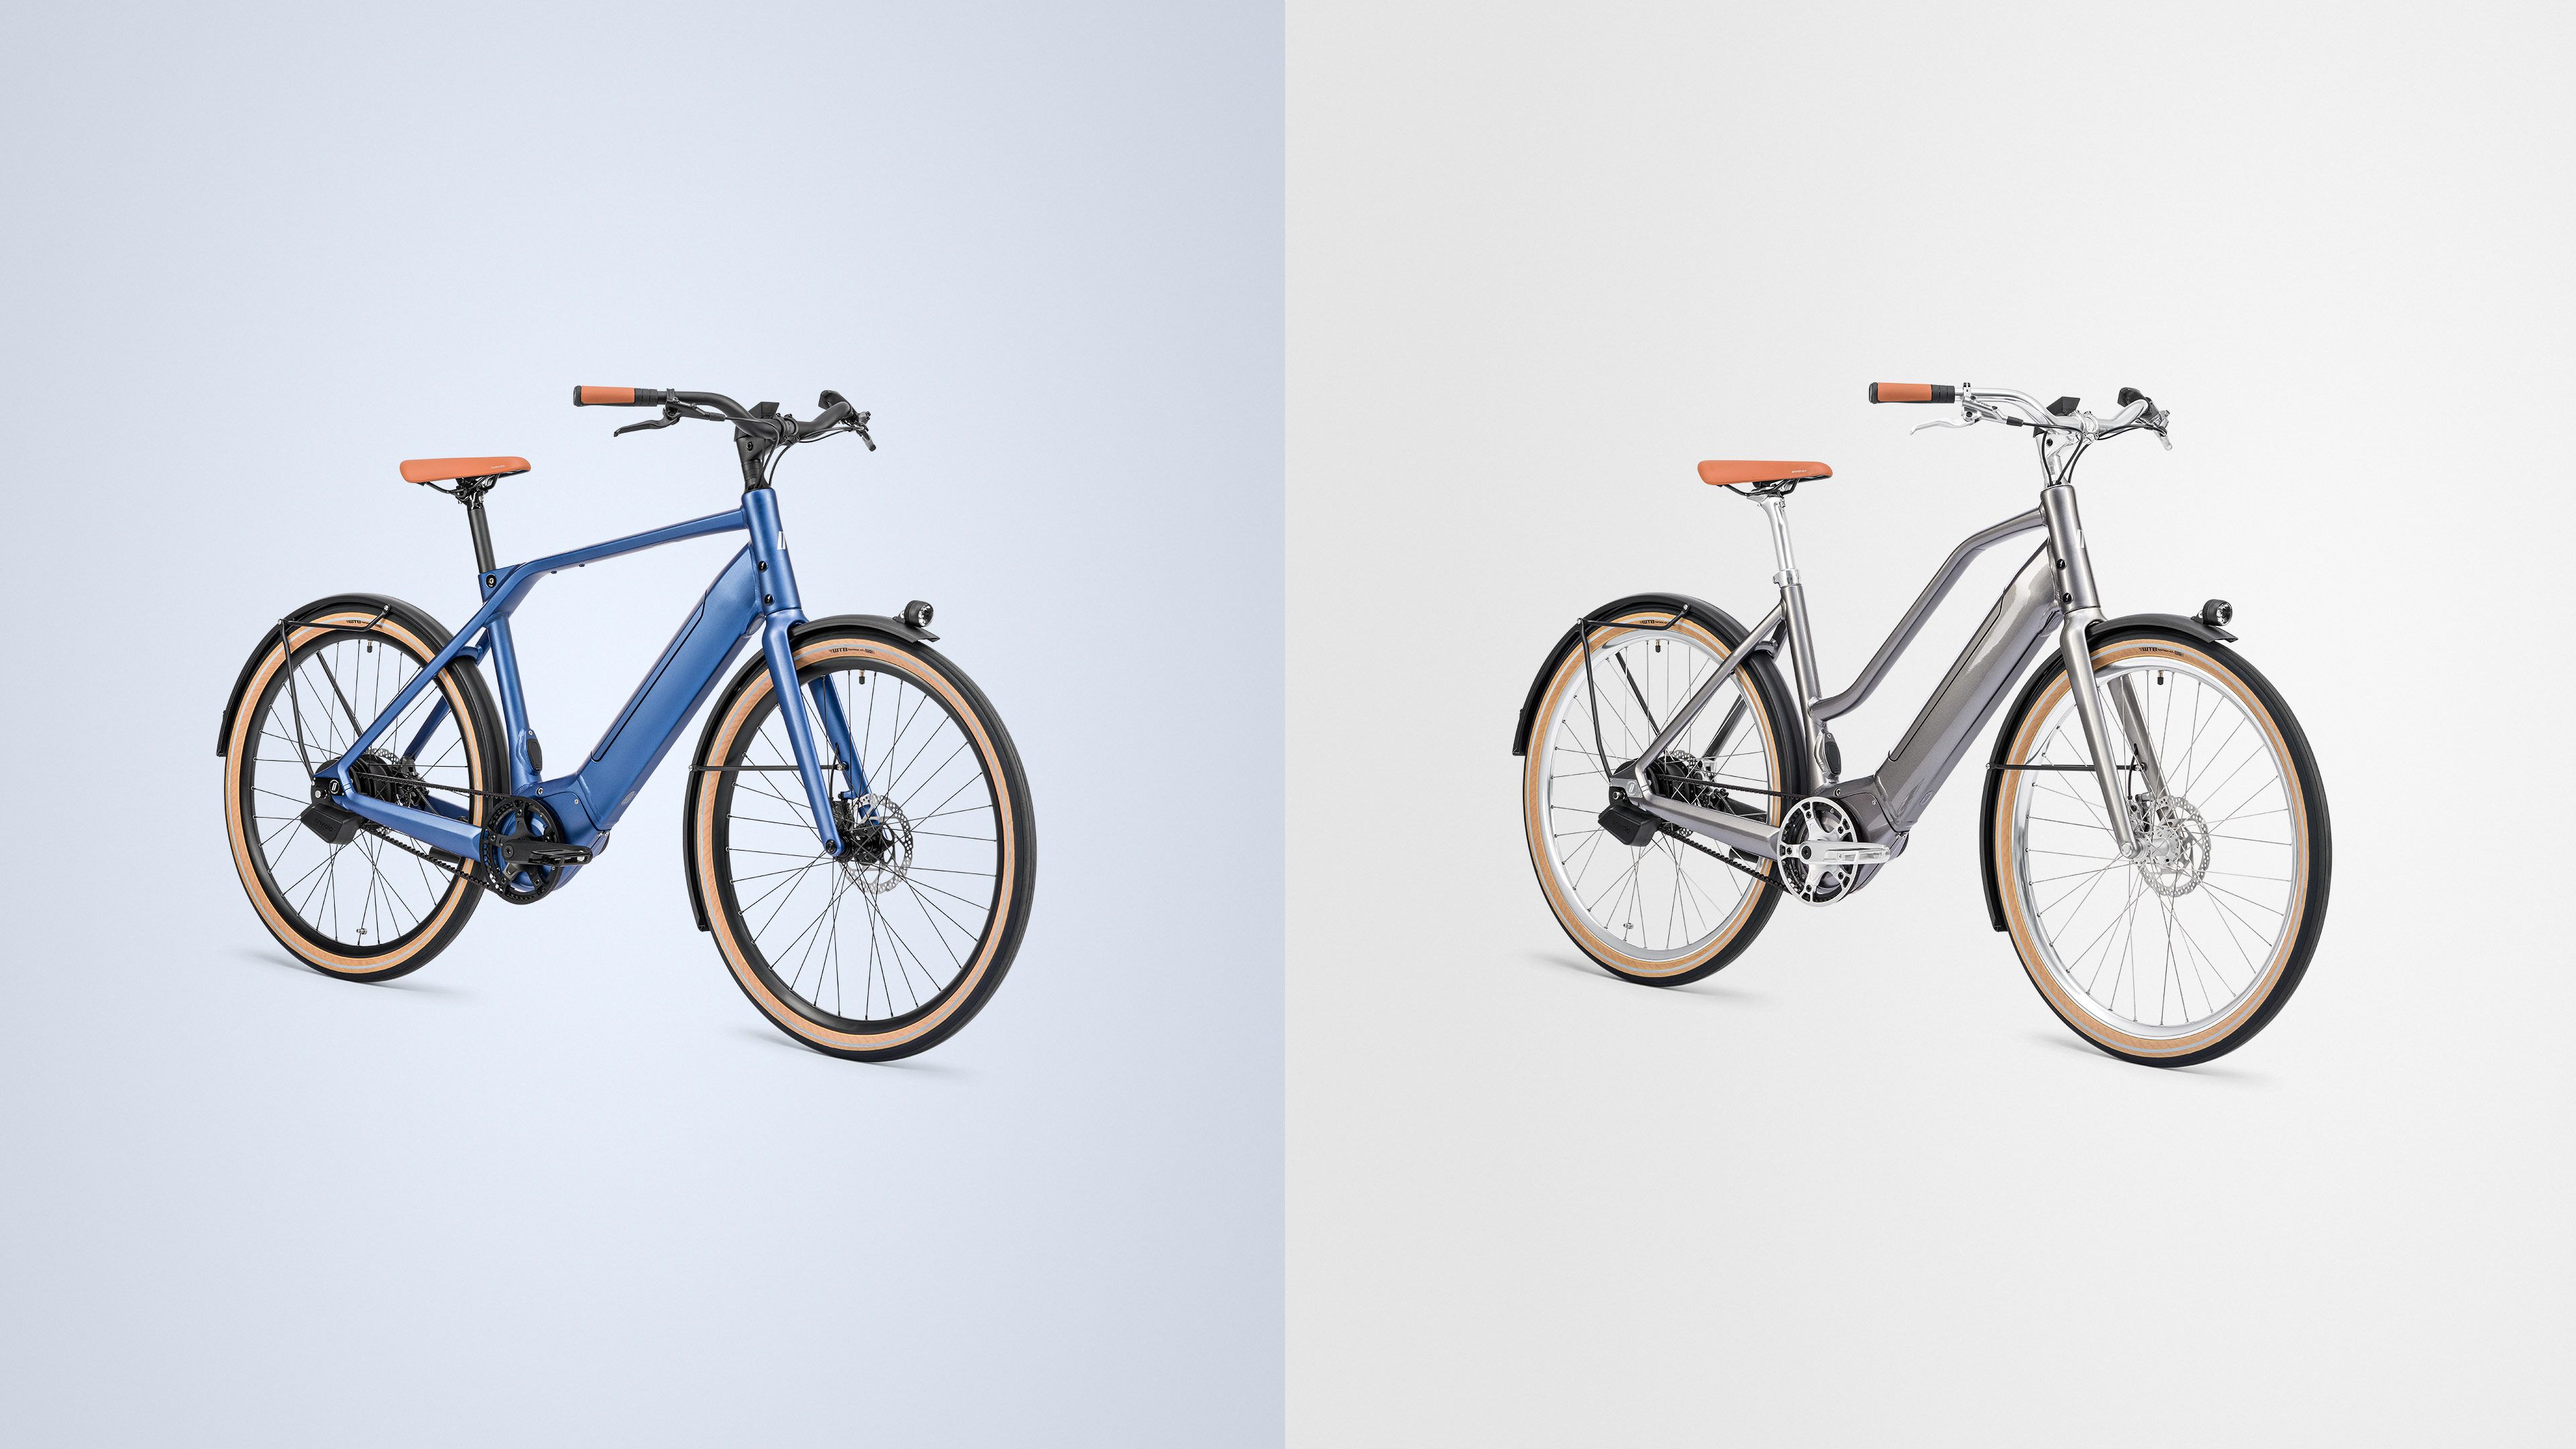 New colours for Heinrich and Hannah - Two new variants for our Bosch-powered e-bikes: pearl blue with black components and titanium silver with a silver polished finish.